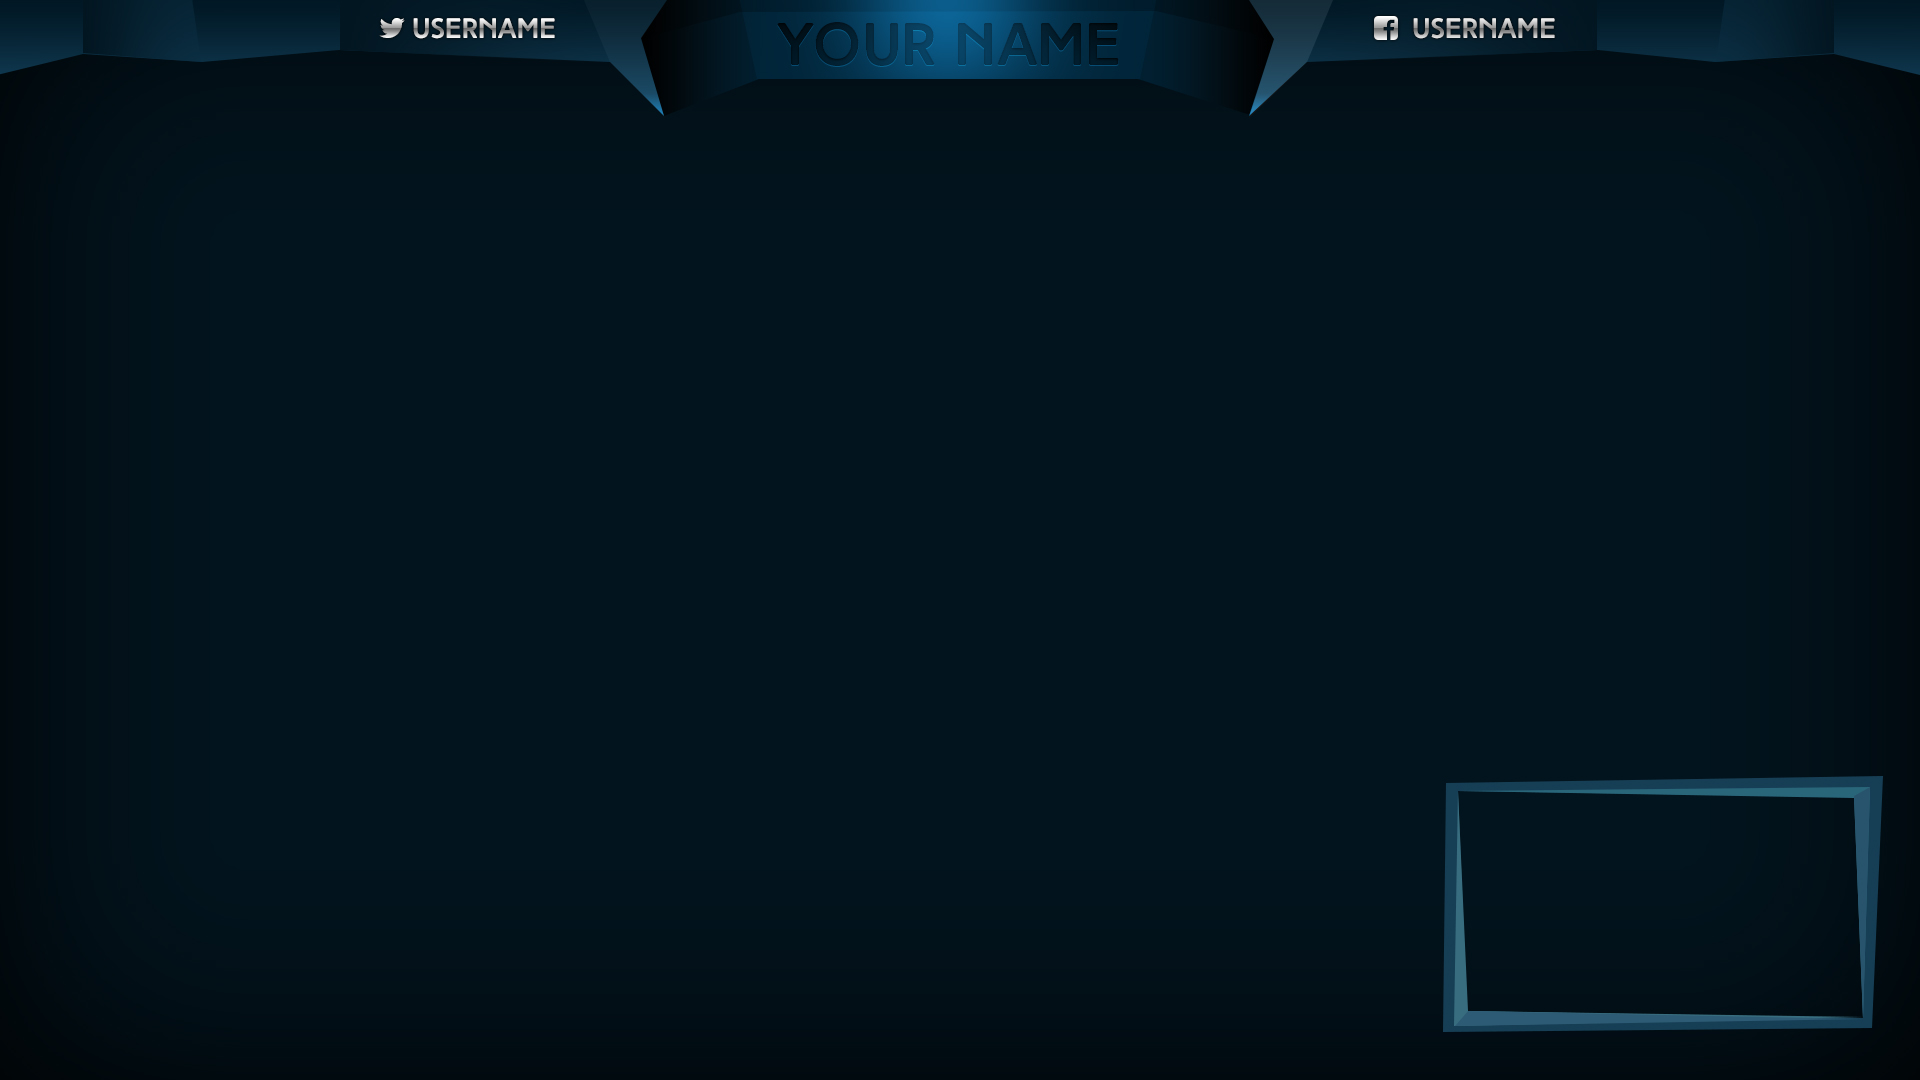 Blank Stream Overlay Template New Concept Bank2home com